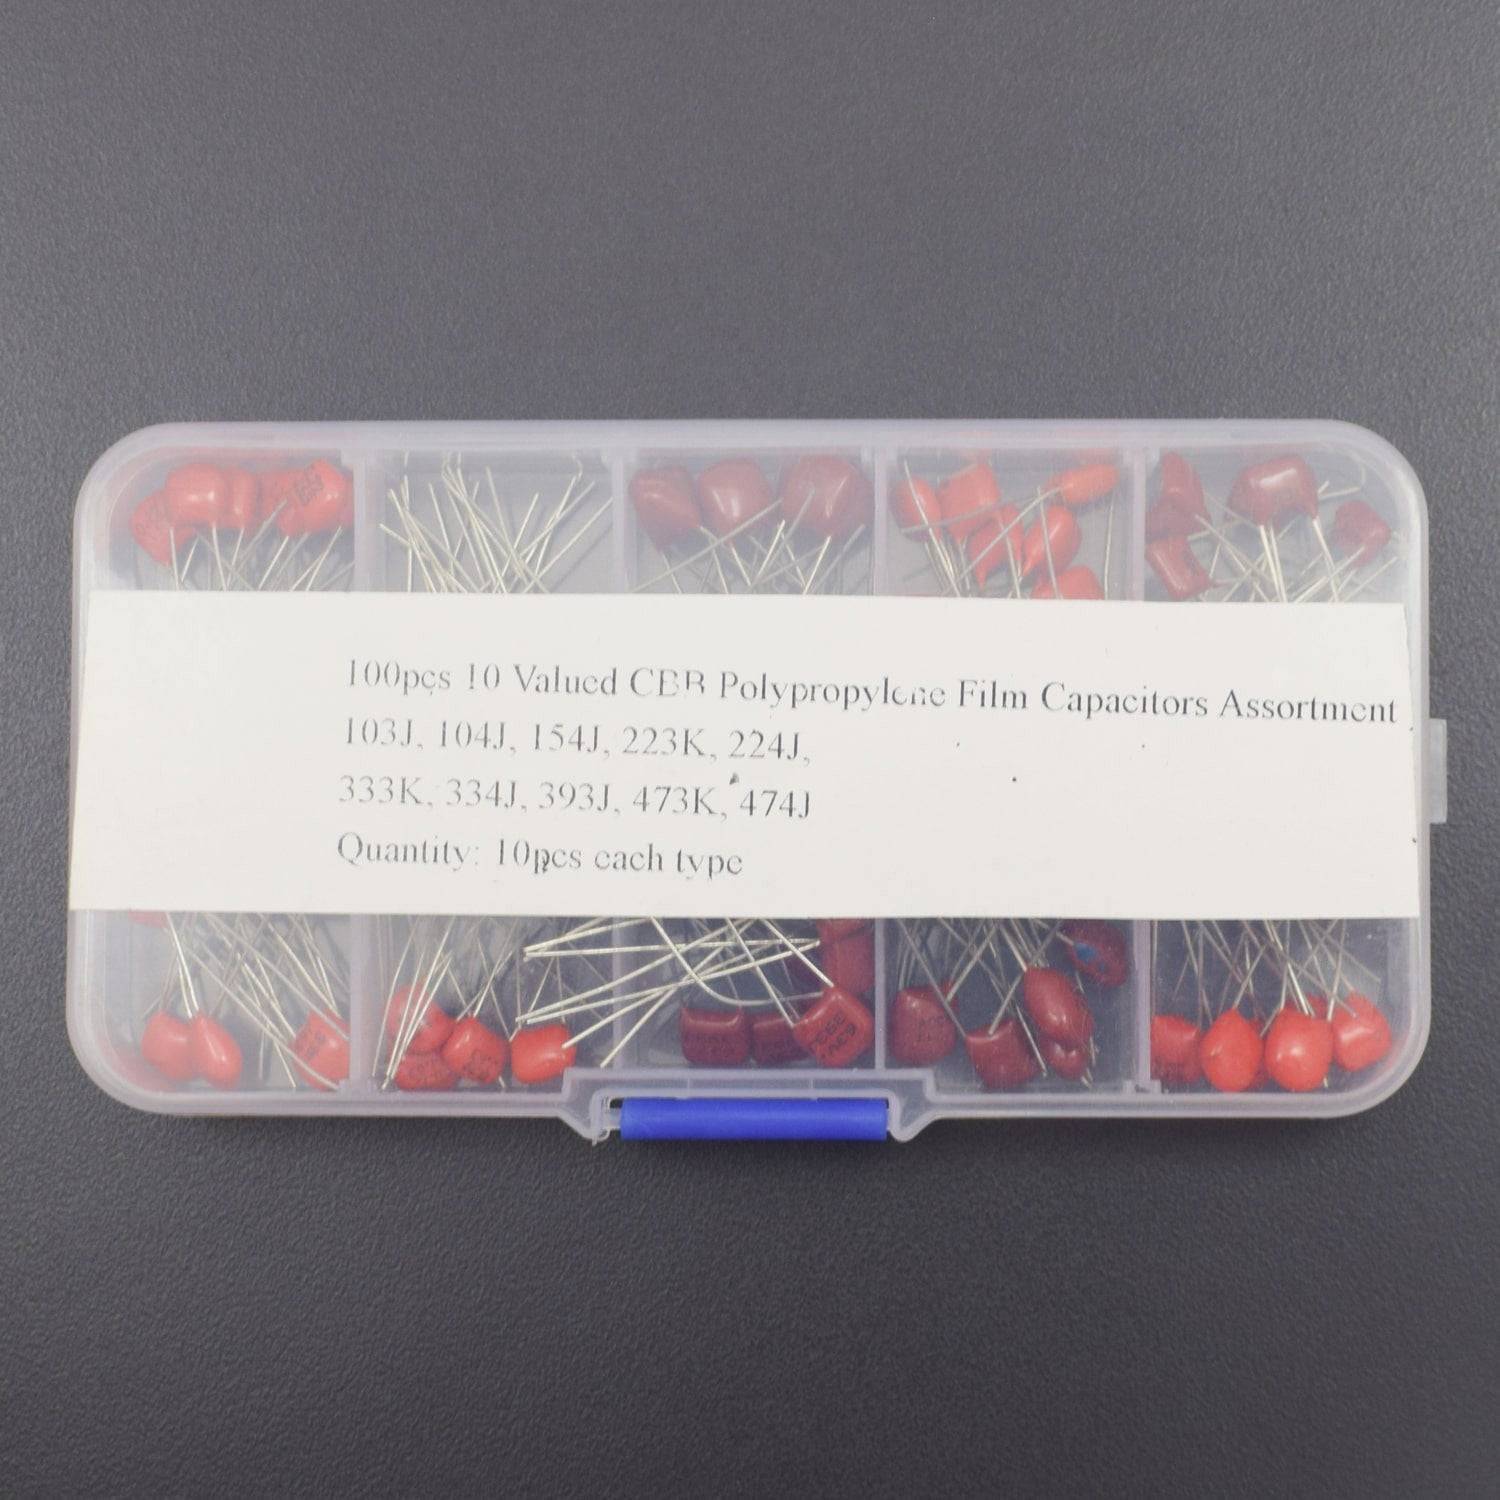 100 Pieces 10 Values CBB Polypropylene Capacitor Assortment Kit 10nF-470nF Metalized Film Capacitor with Storage Box - RS1849 - REES52